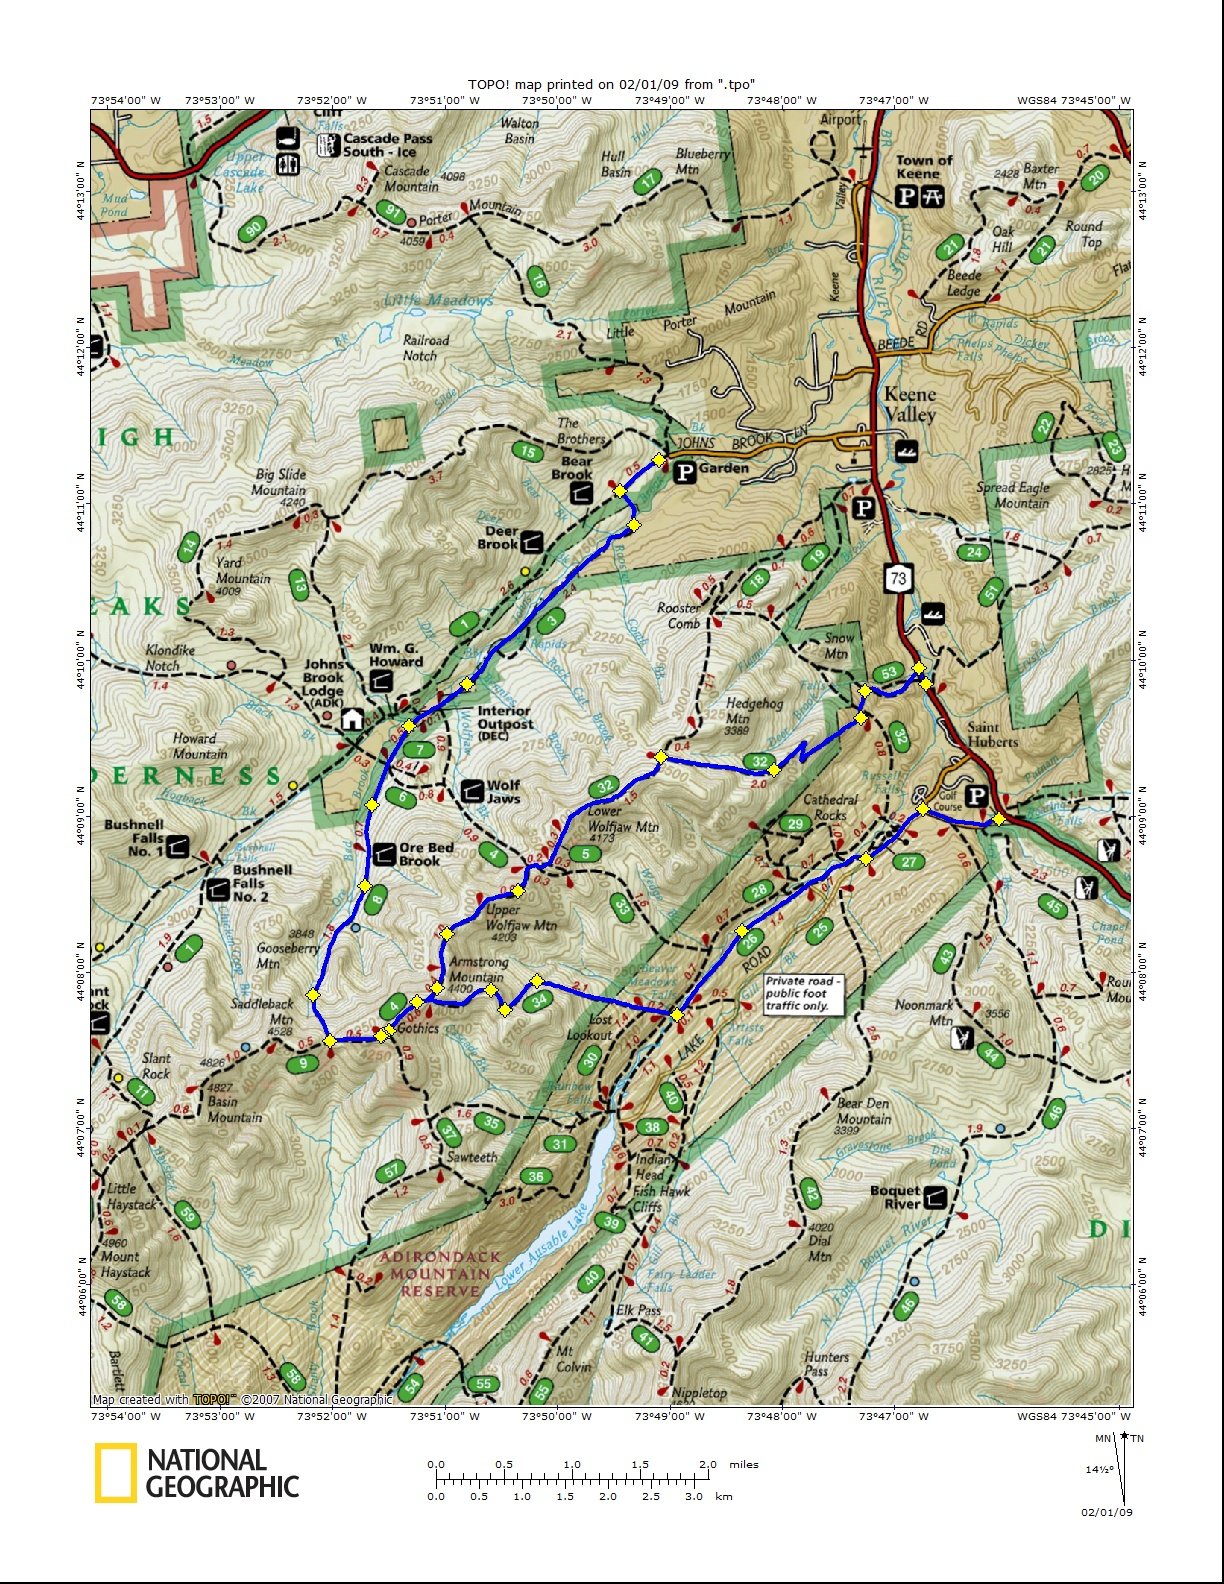 Gothics Mountain Hiking Trail Guide: Map, Trail Descriptions, Pictures &amp; More